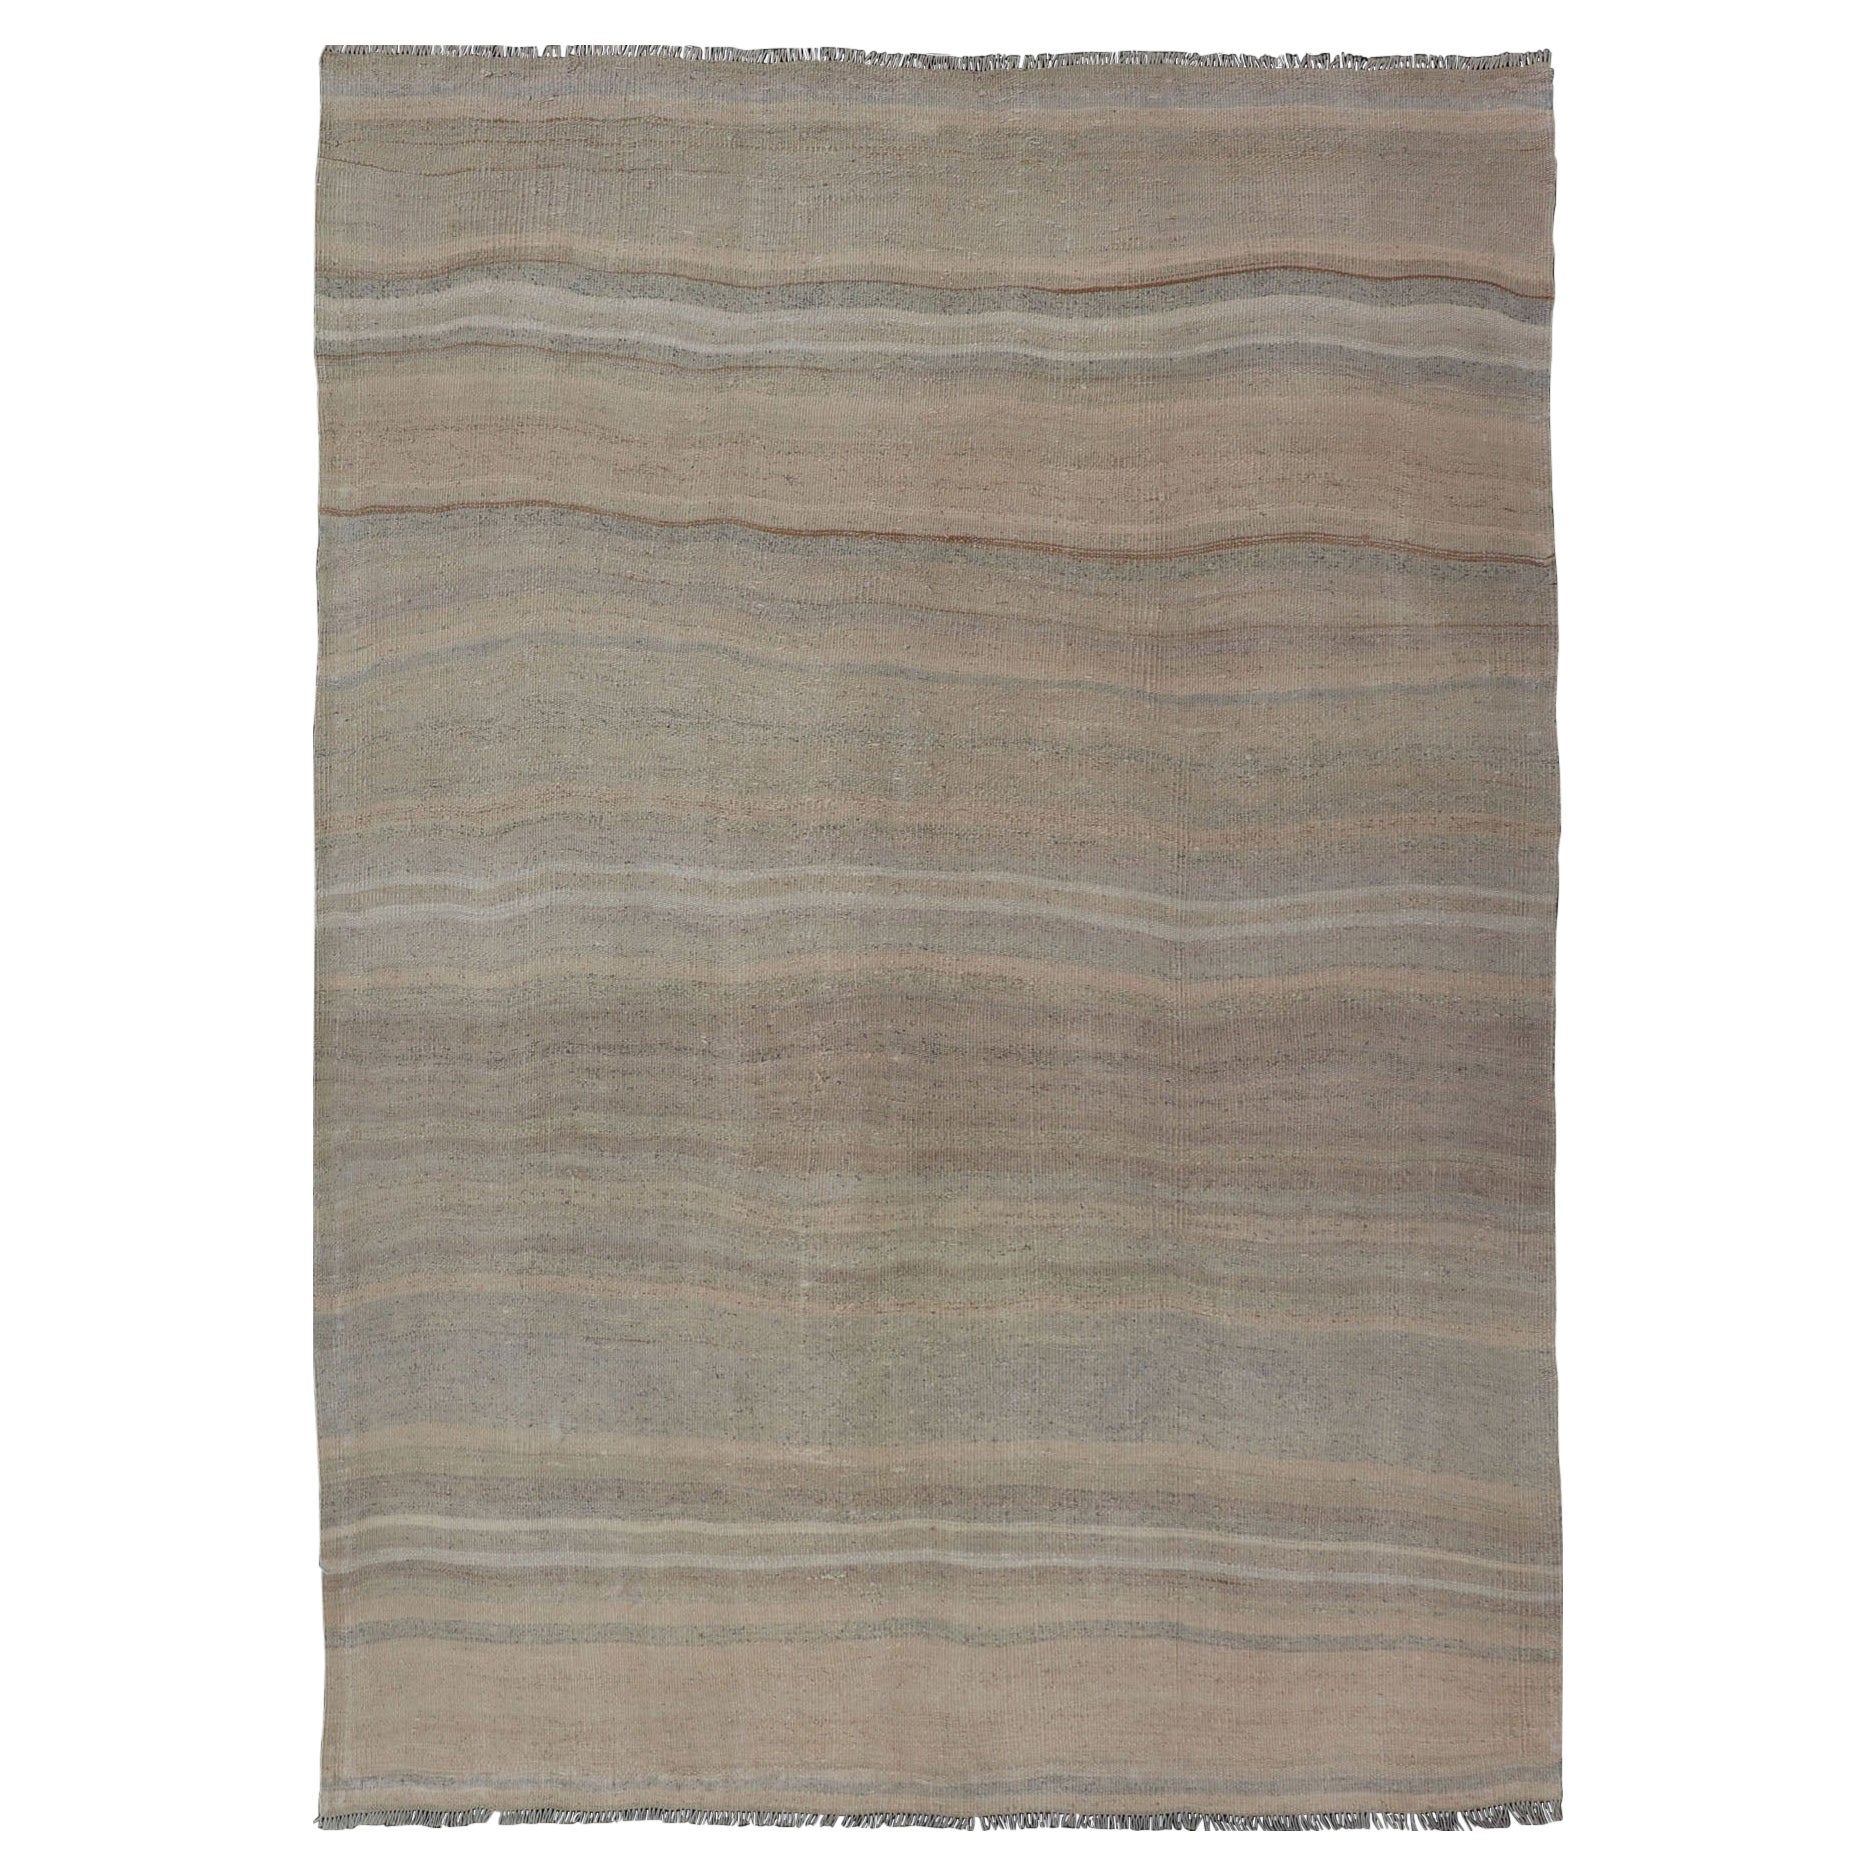 Vintage Turkish Kilim with Stripes in Taupe, Gray, Tan, Cream and Brown For Sale